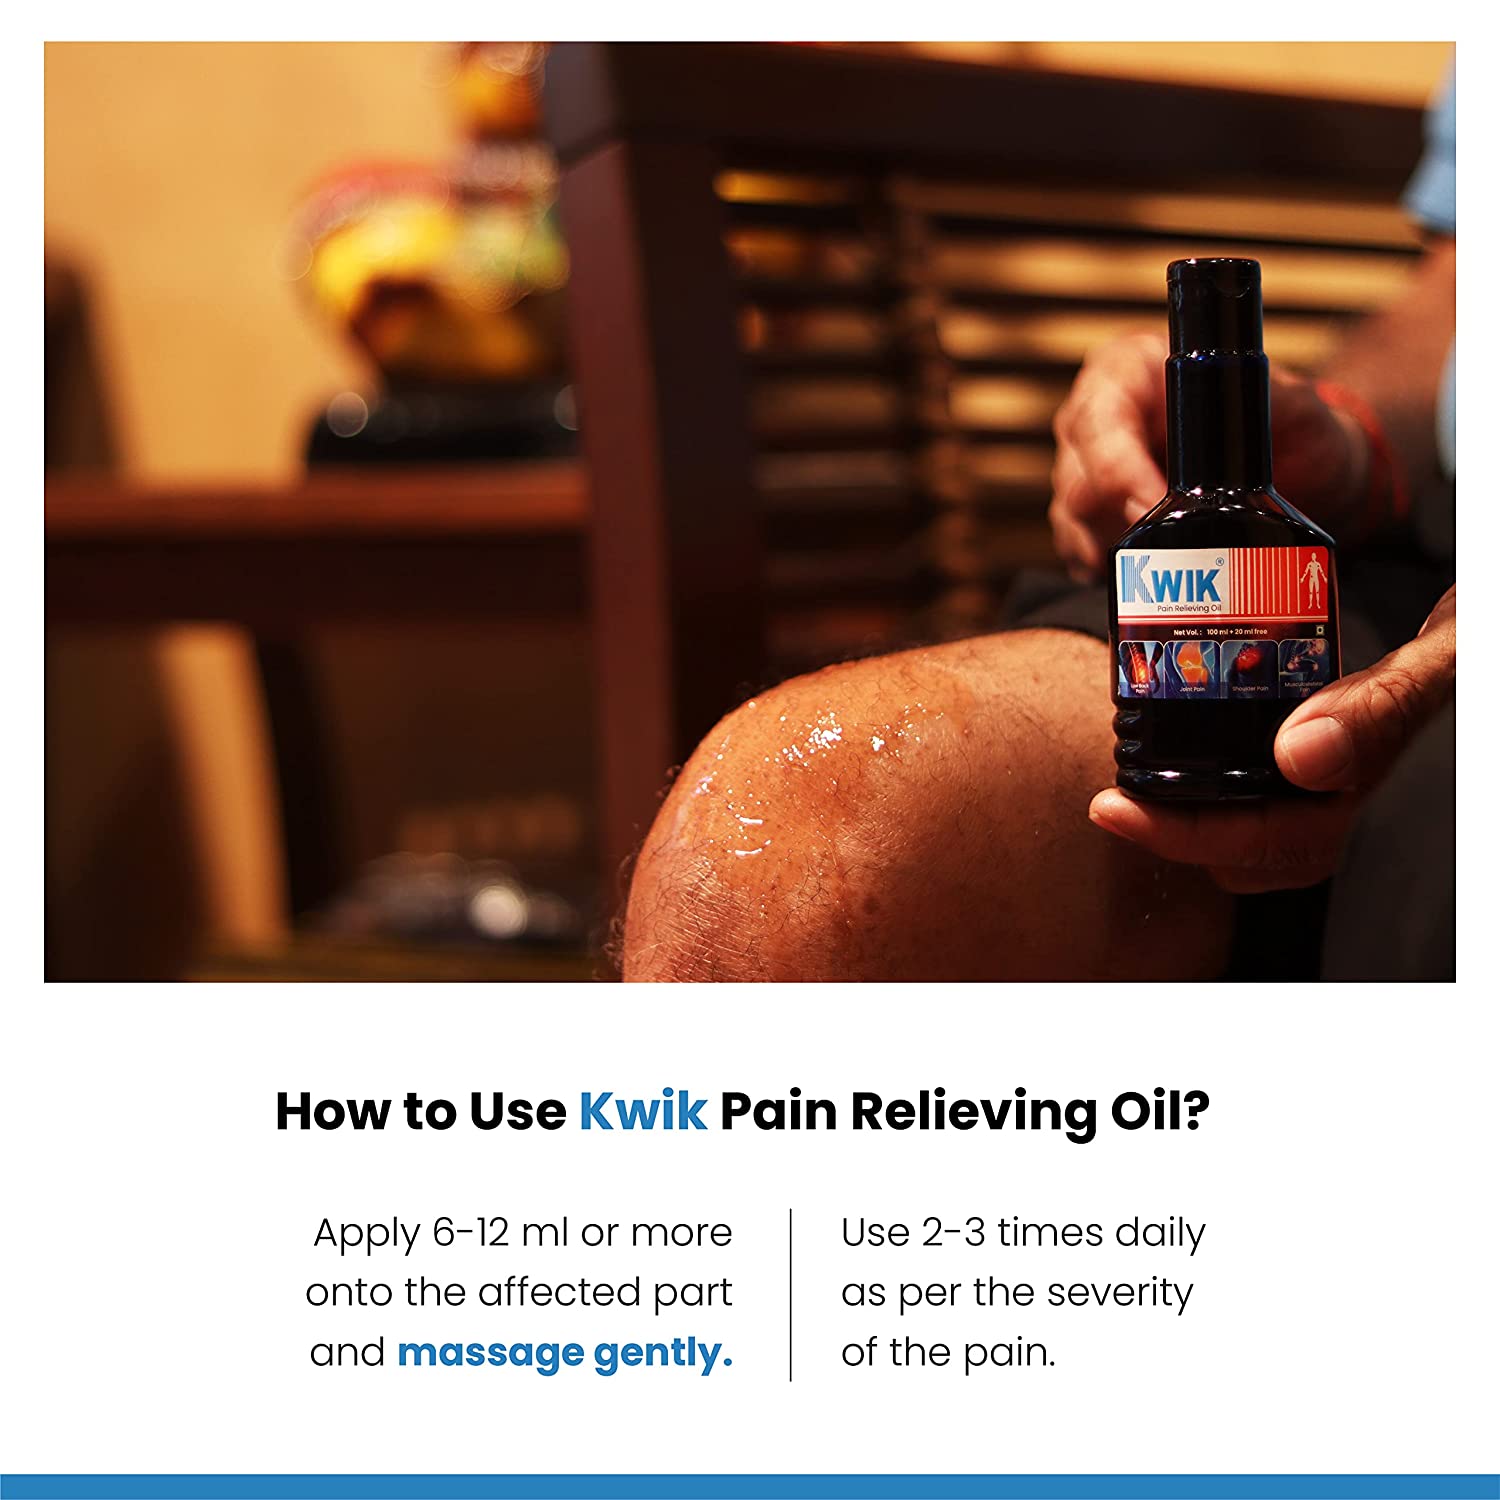 An image showing how to apply Kwik Pain Relieving Oil